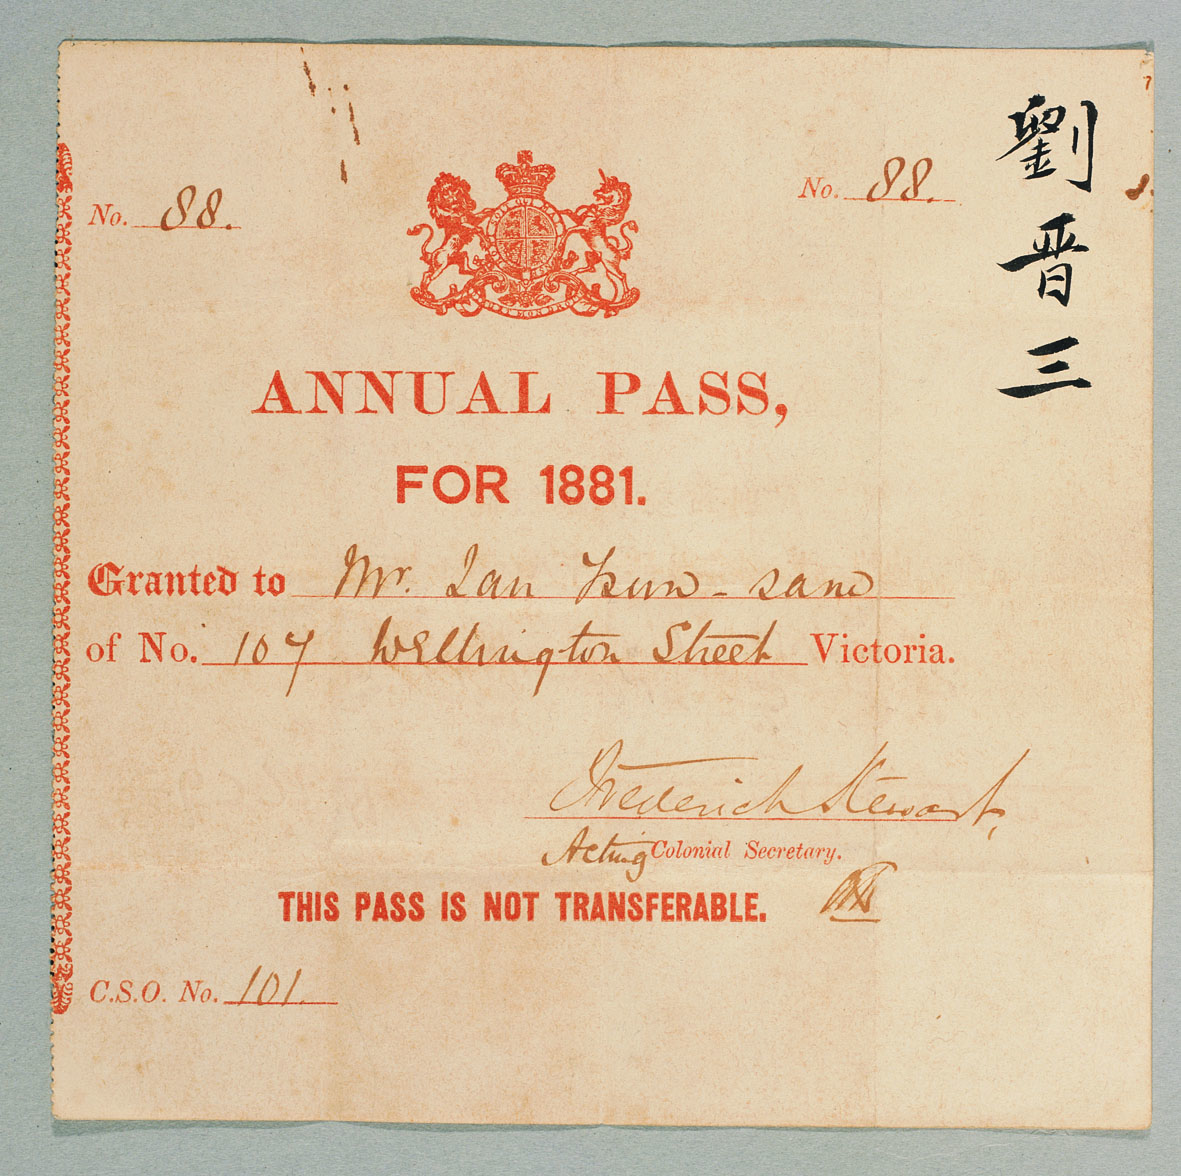 Annual pass issued by the Hong Kong government, 1881.